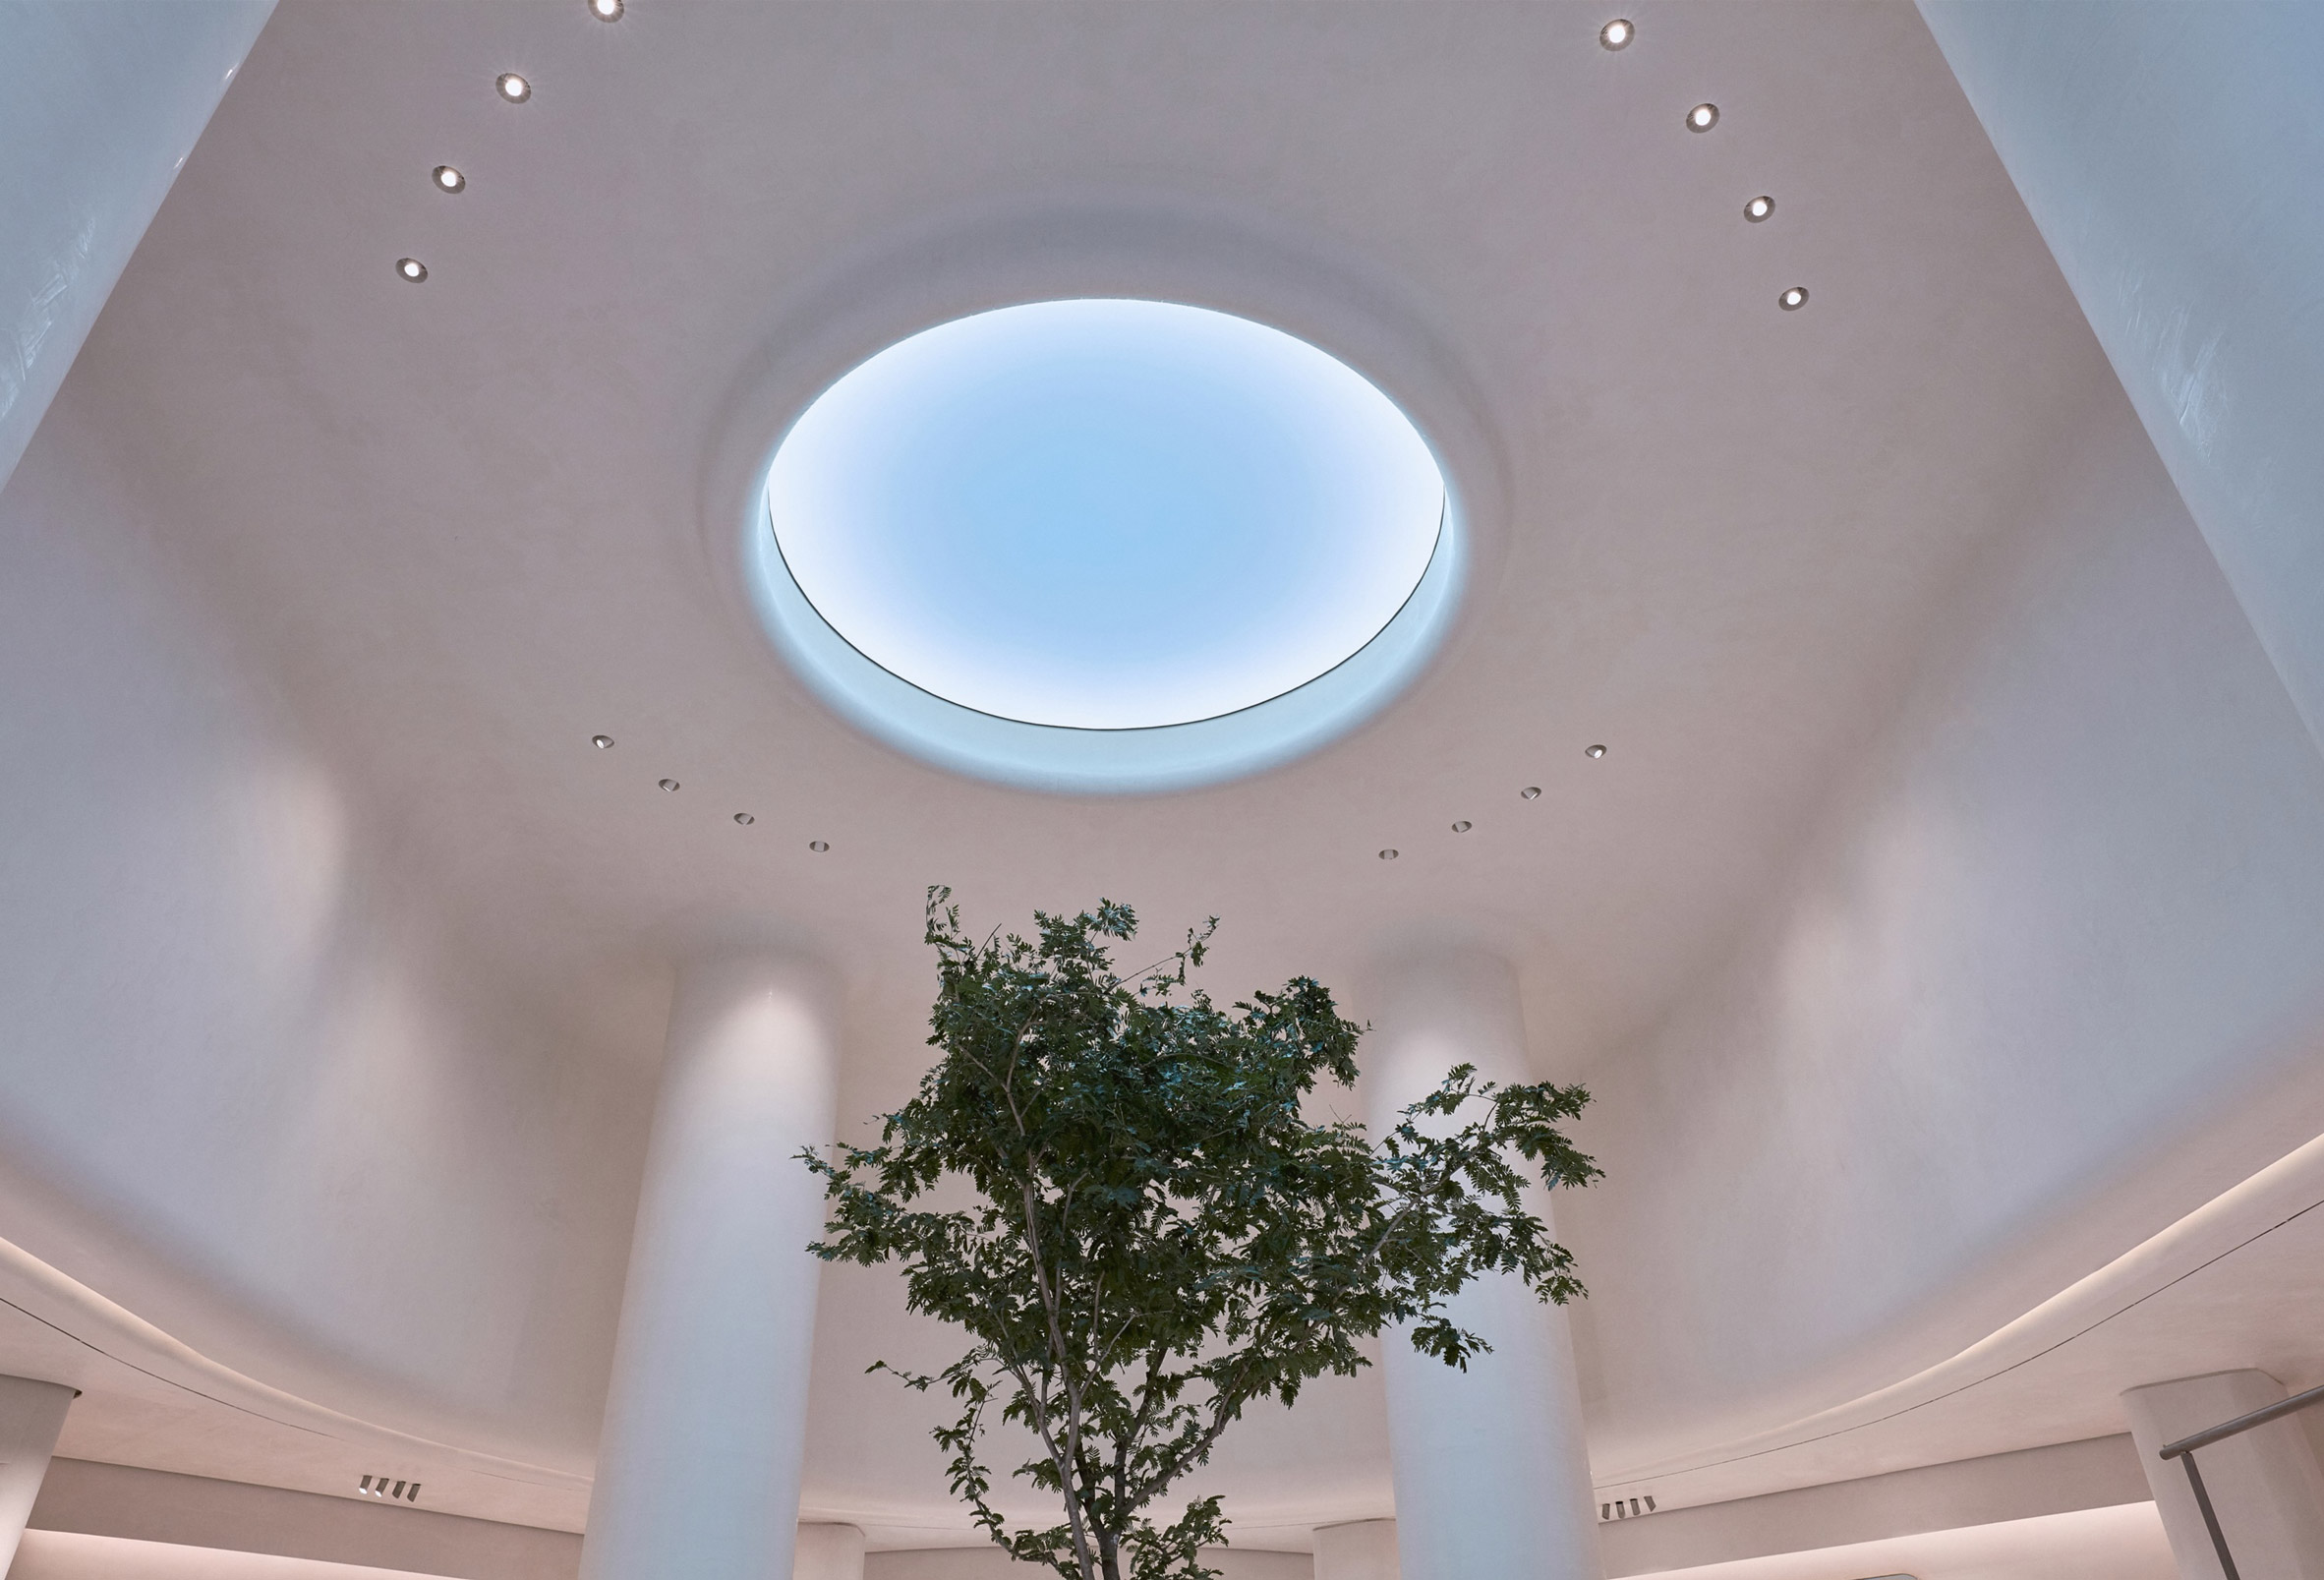 Light Cognitive created an artificial skylight hat mirrors the actual gradients of the sky